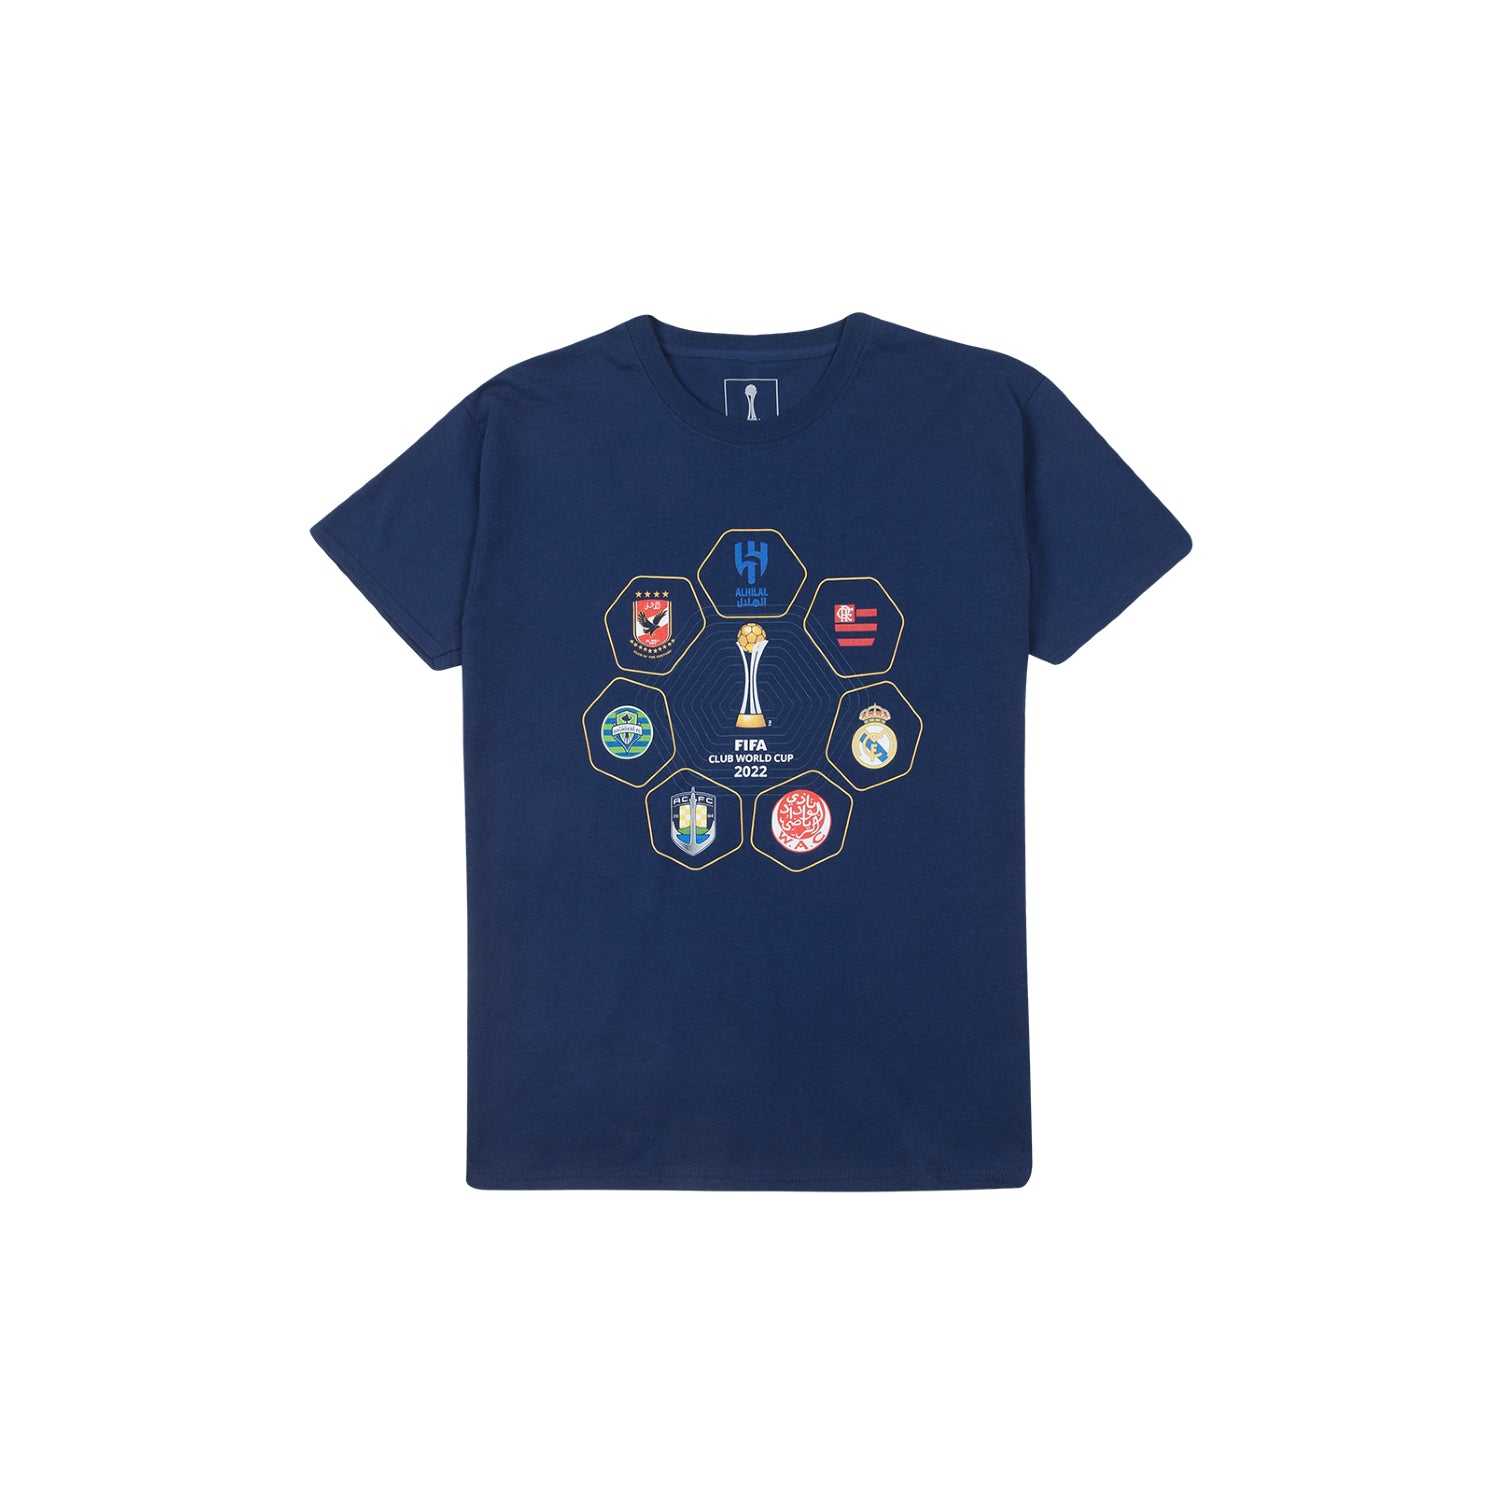 FIFA Club World Cup 2022 Navy T-Shirt - Youths